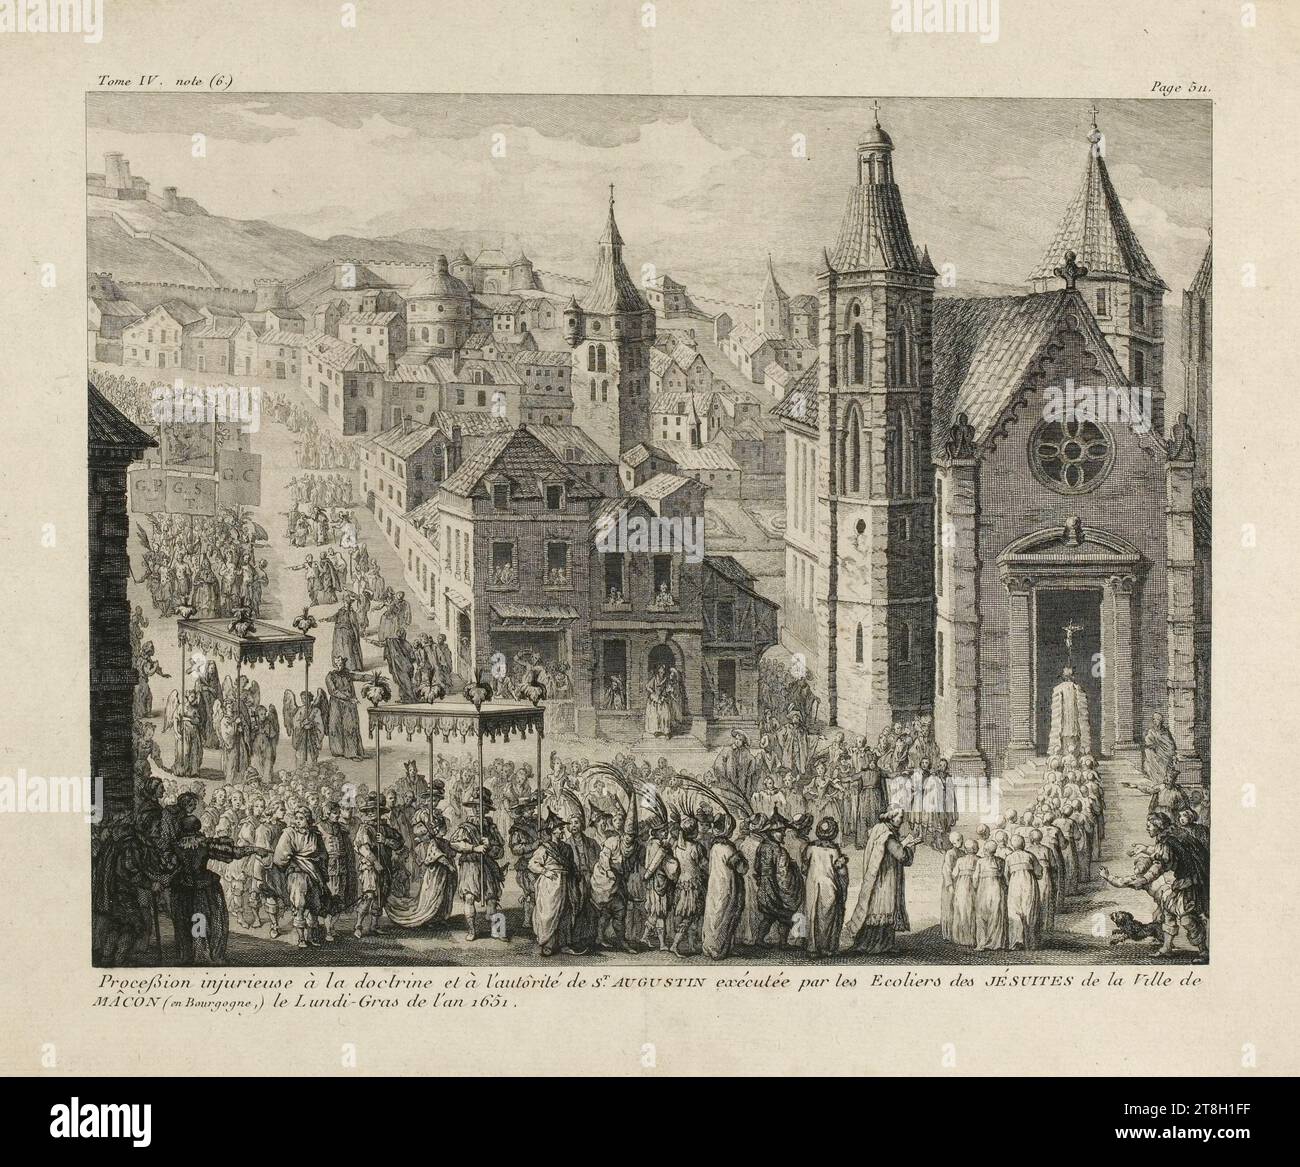 Procession insulting the doctrine and authority of St Augustine performed by the school children of the Jesuits of the city of, Mâcon (in Burgundy), Engraver, Print, Graphic art, Print, Woodcut, Dimensions - Work: Height: 25.9 cm, Width: 31.1 cm, Dimensions - Mounting:, Height: 32.6 cm, Width: 49.8 cm Stock Photo